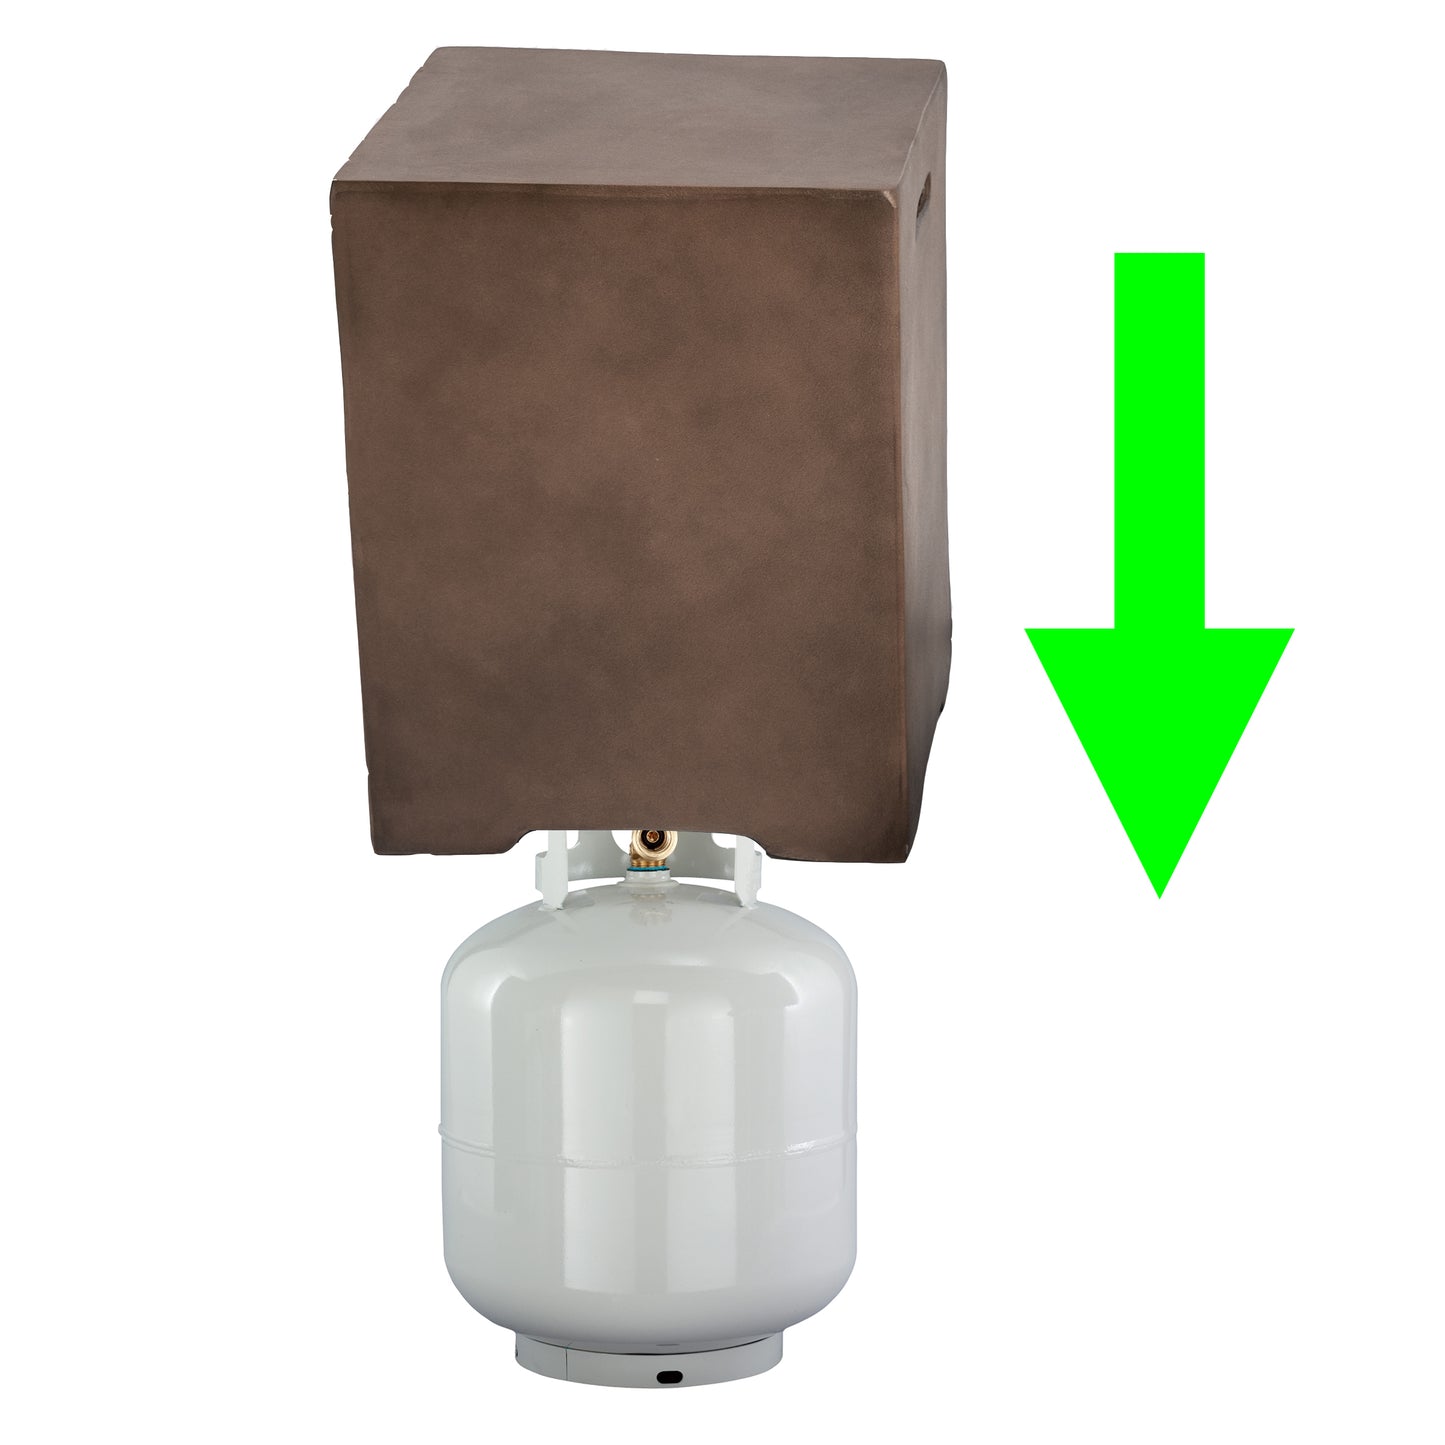 20lbs Hideaway Propane Gas Tank Cover/Holder, Outdoor Side Table